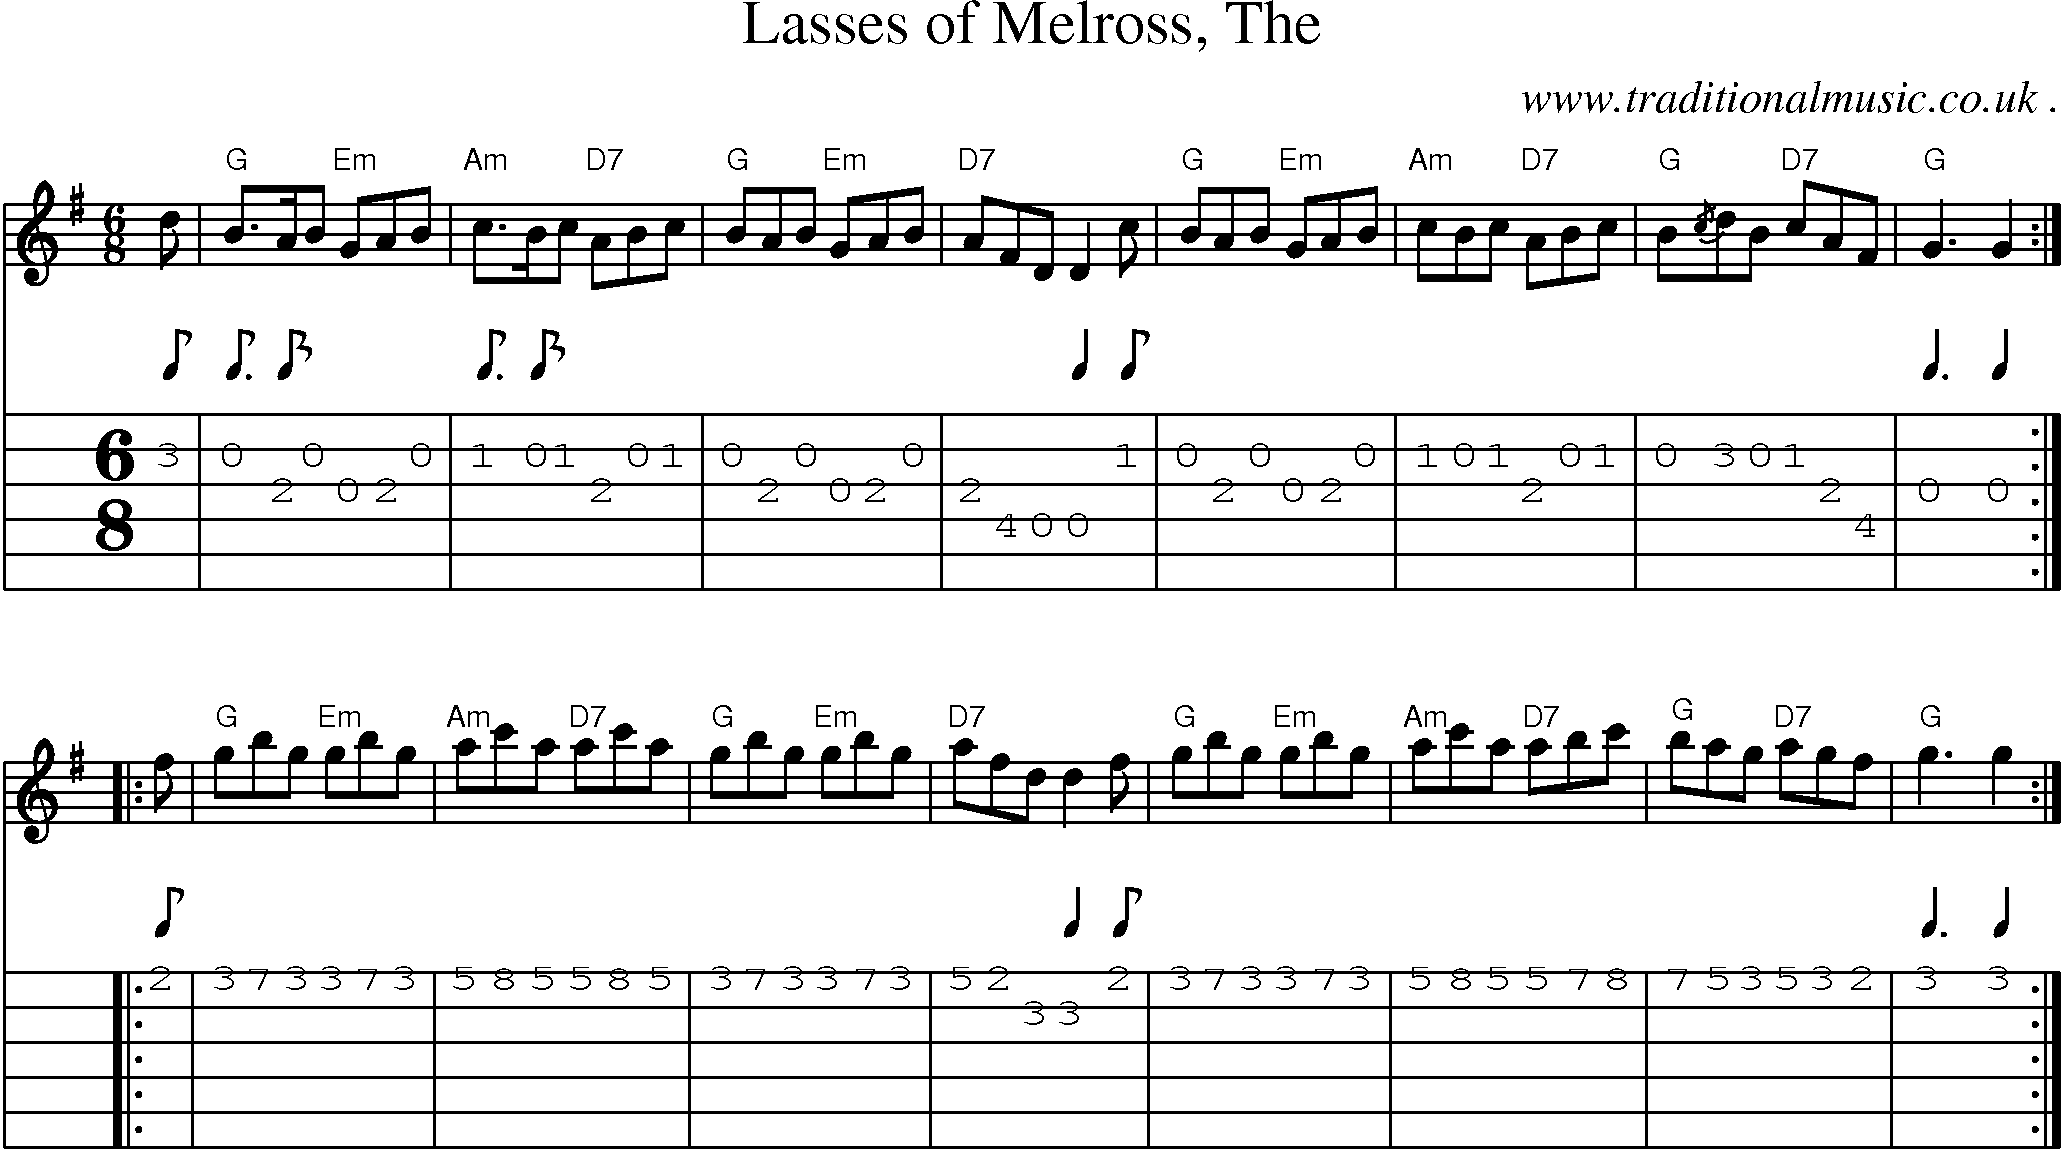 Sheet-music  score, Chords and Guitar Tabs for Lasses Of Melross The